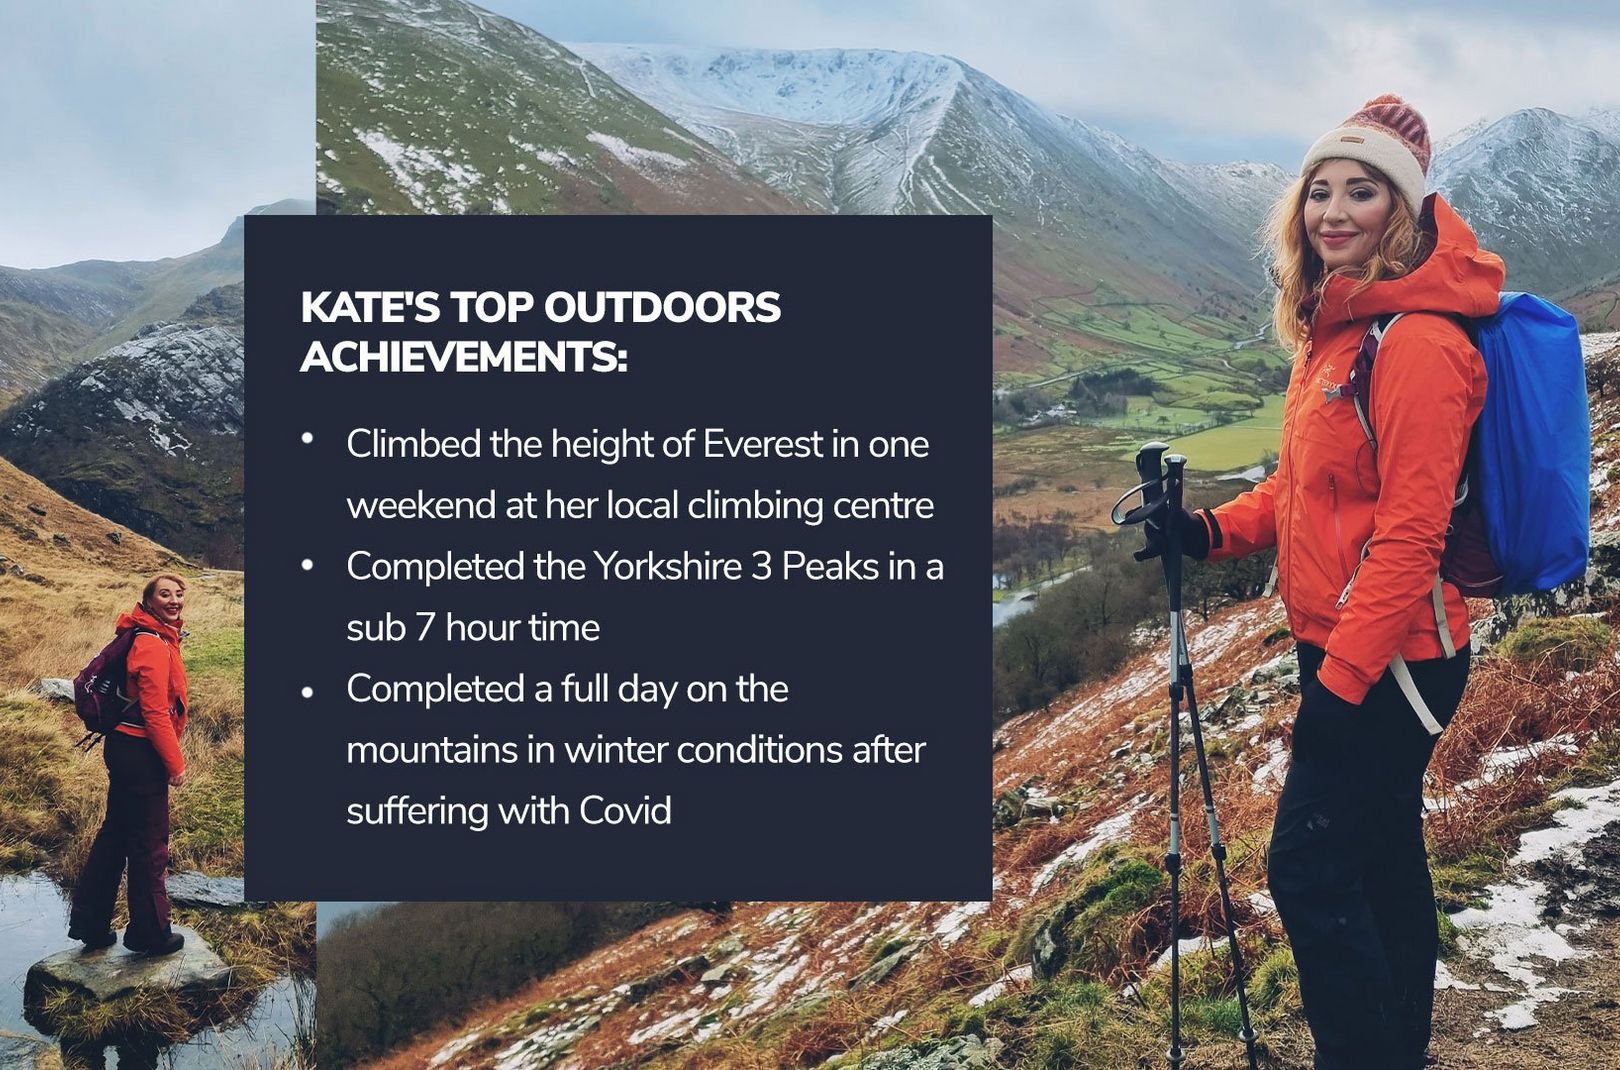 Kate Appleby's top three achievements outdoors